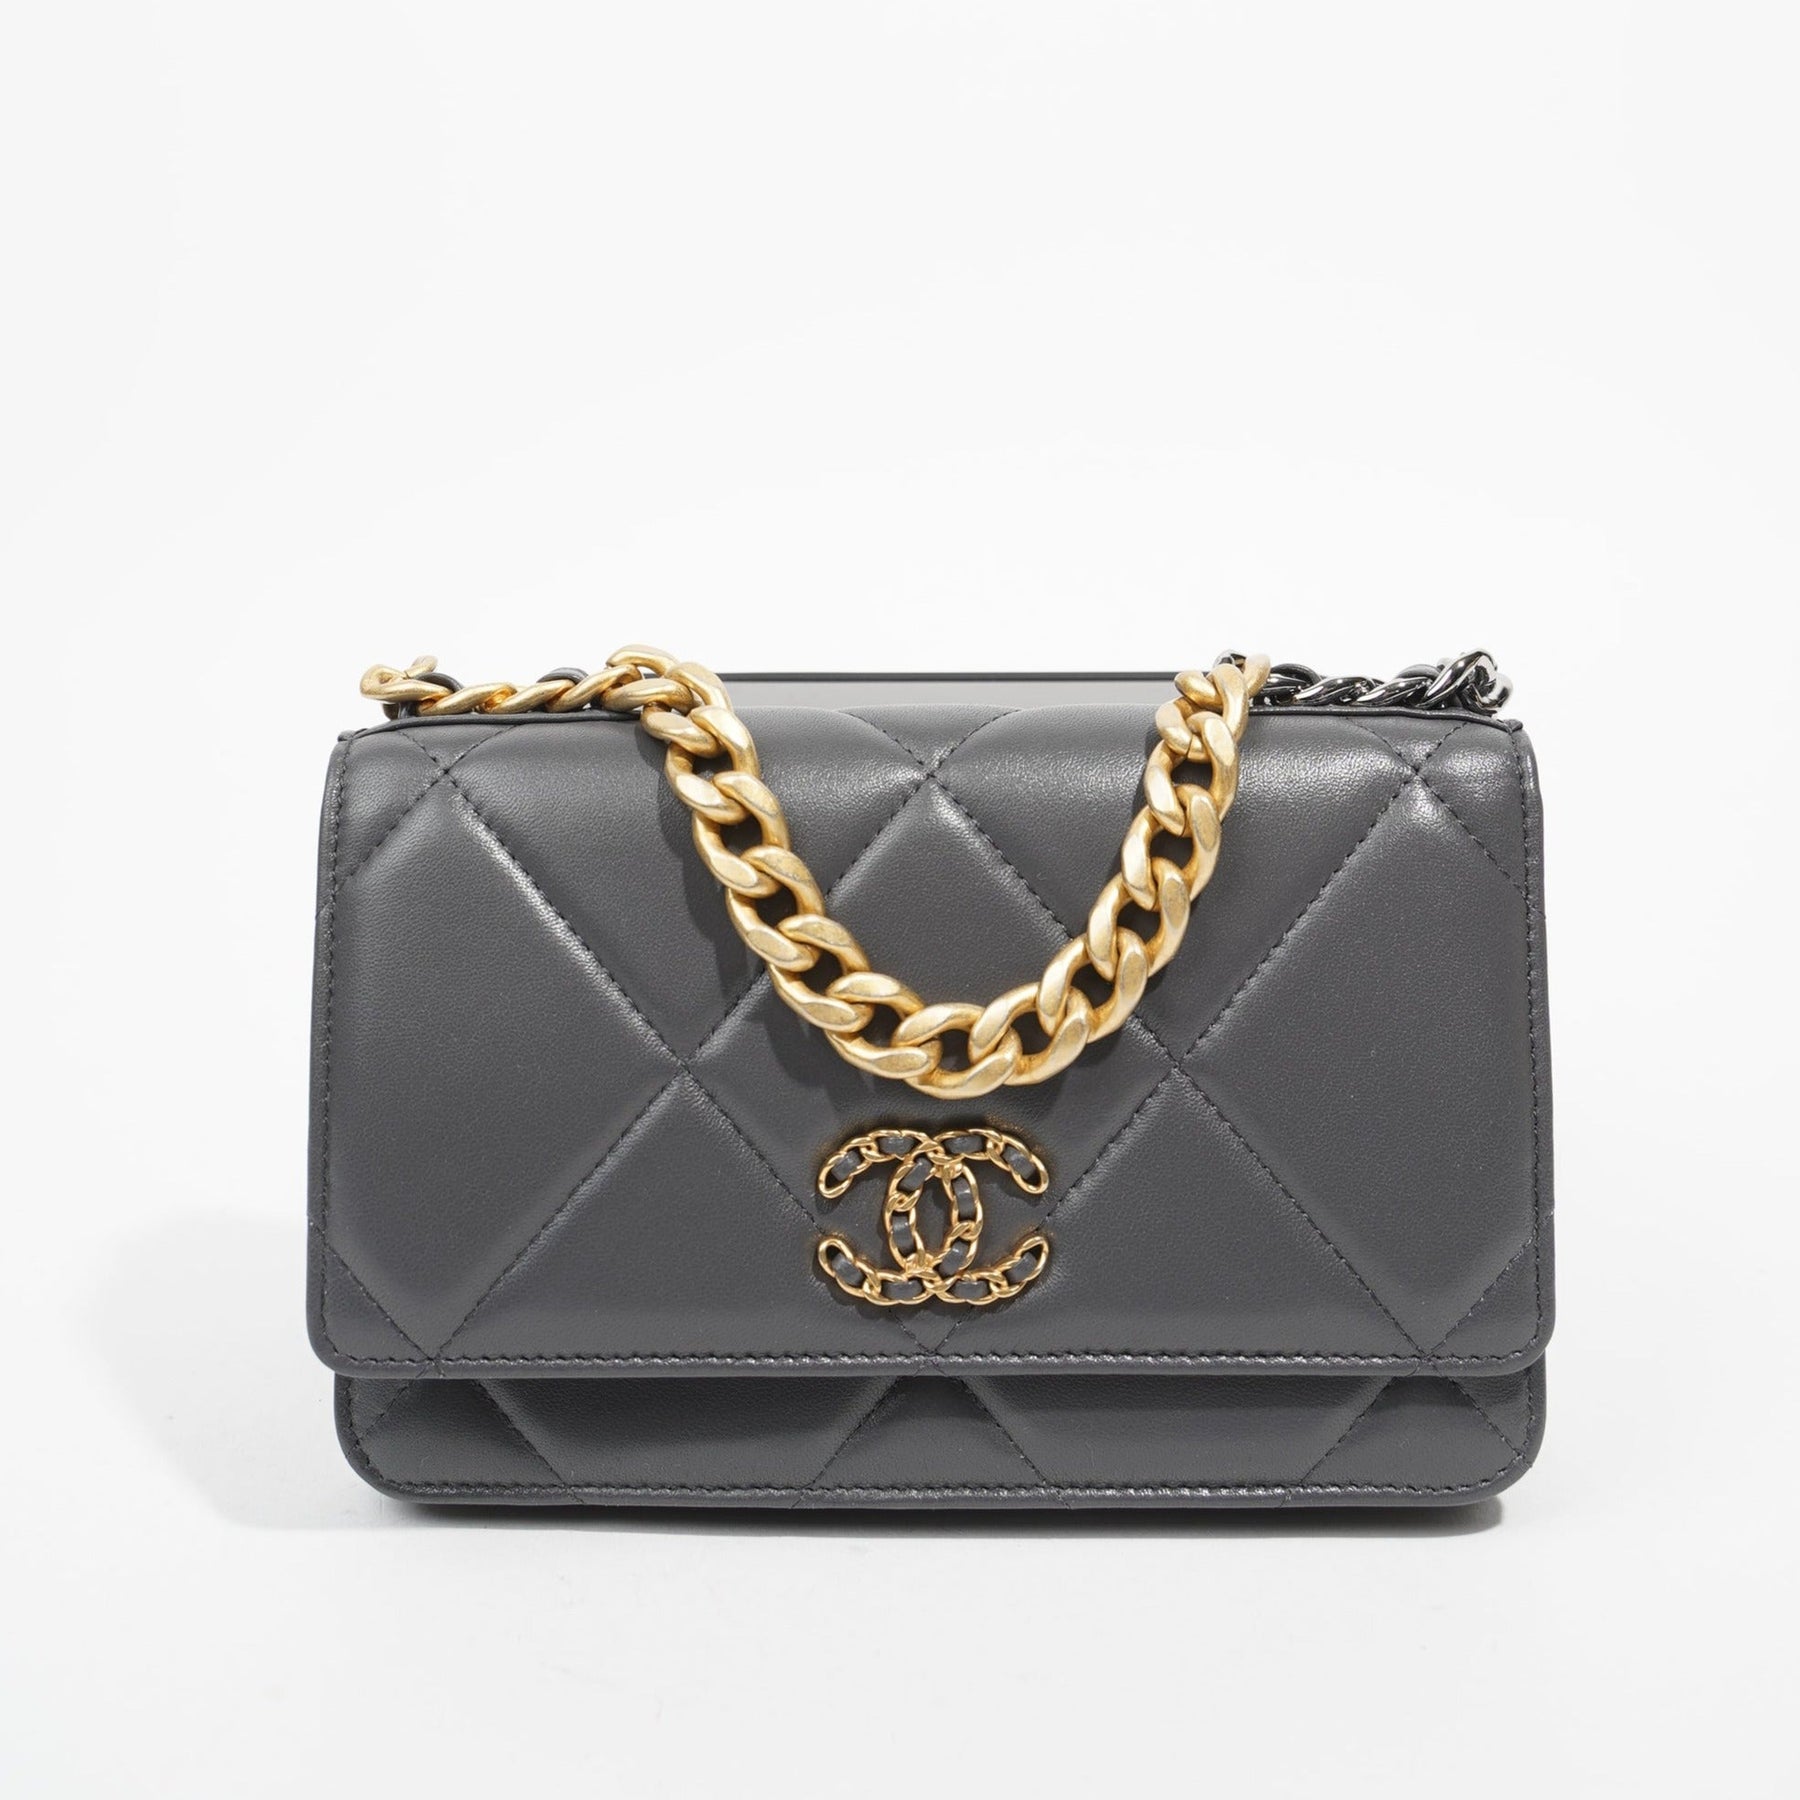 CHANEL Metallic Goatskin Quilted Chanel 19 Wallet On Chain WOC Gold   FASHIONPHILE  Chanel 19 wallet on chain Stylish shoulder bag Chanel 19